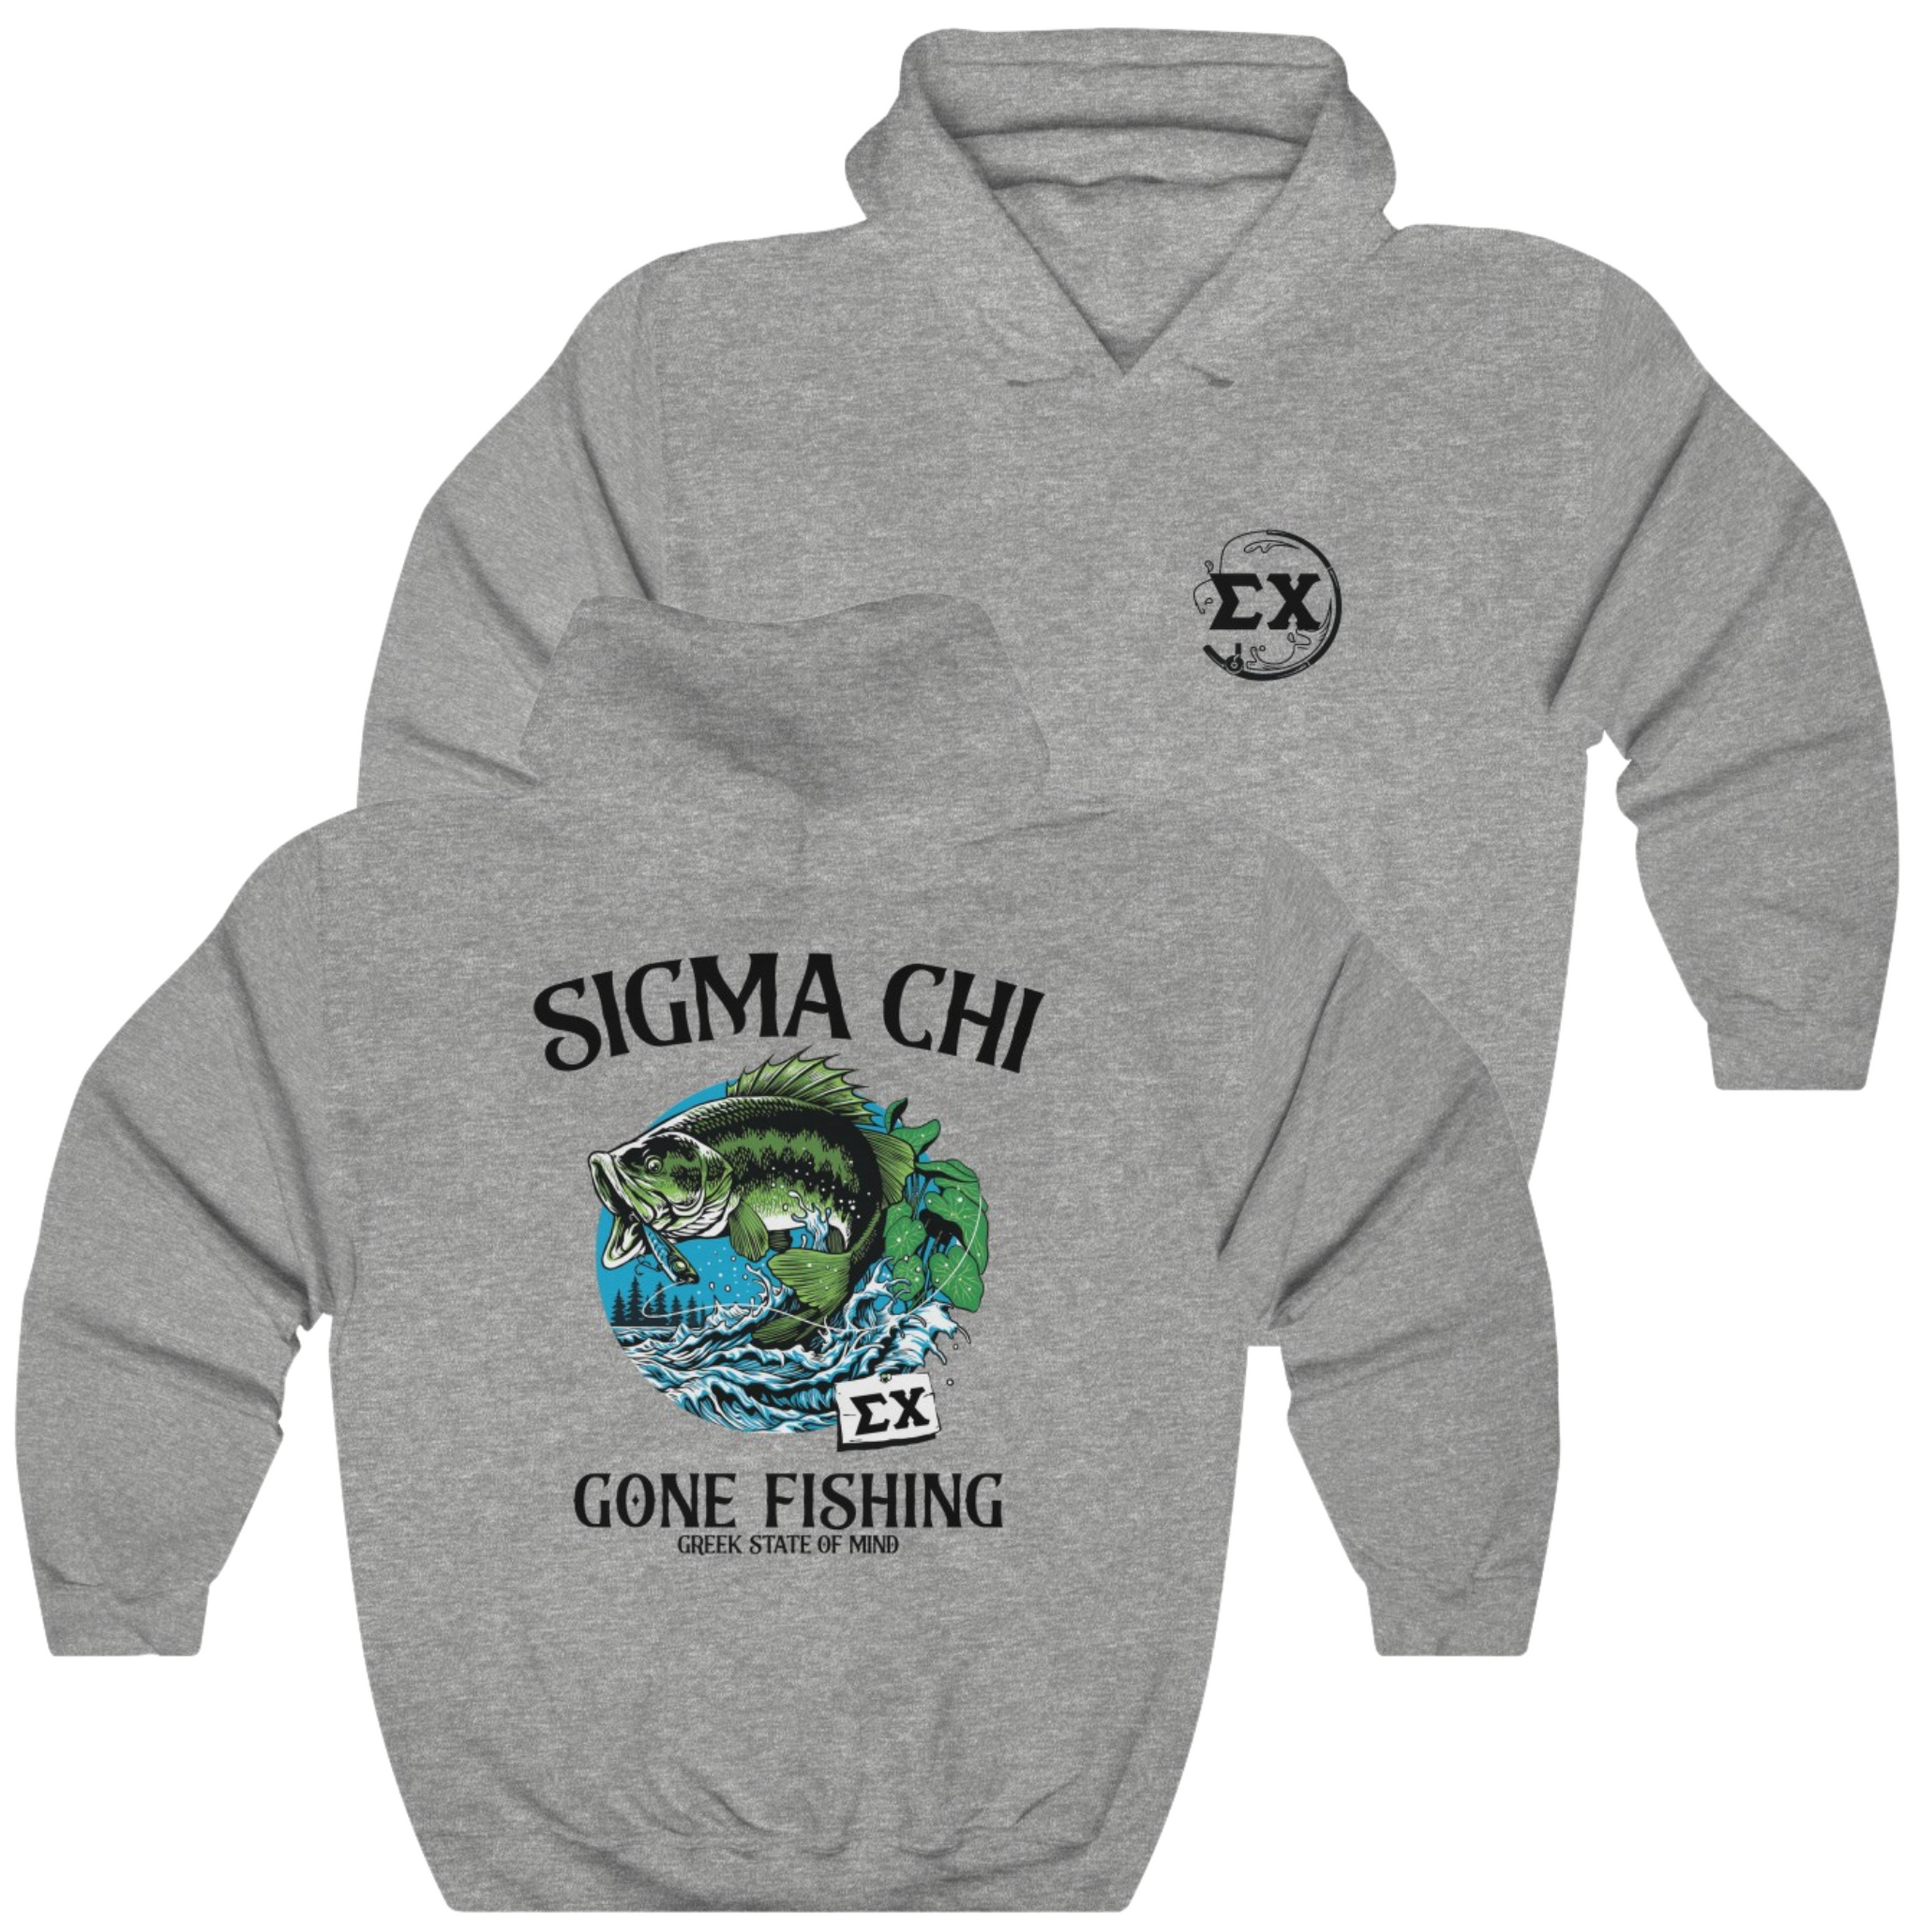 Grey Sigma Chi Graphic Hoodie | Gone Fishing | Sigma Chi Fraternity Apparel